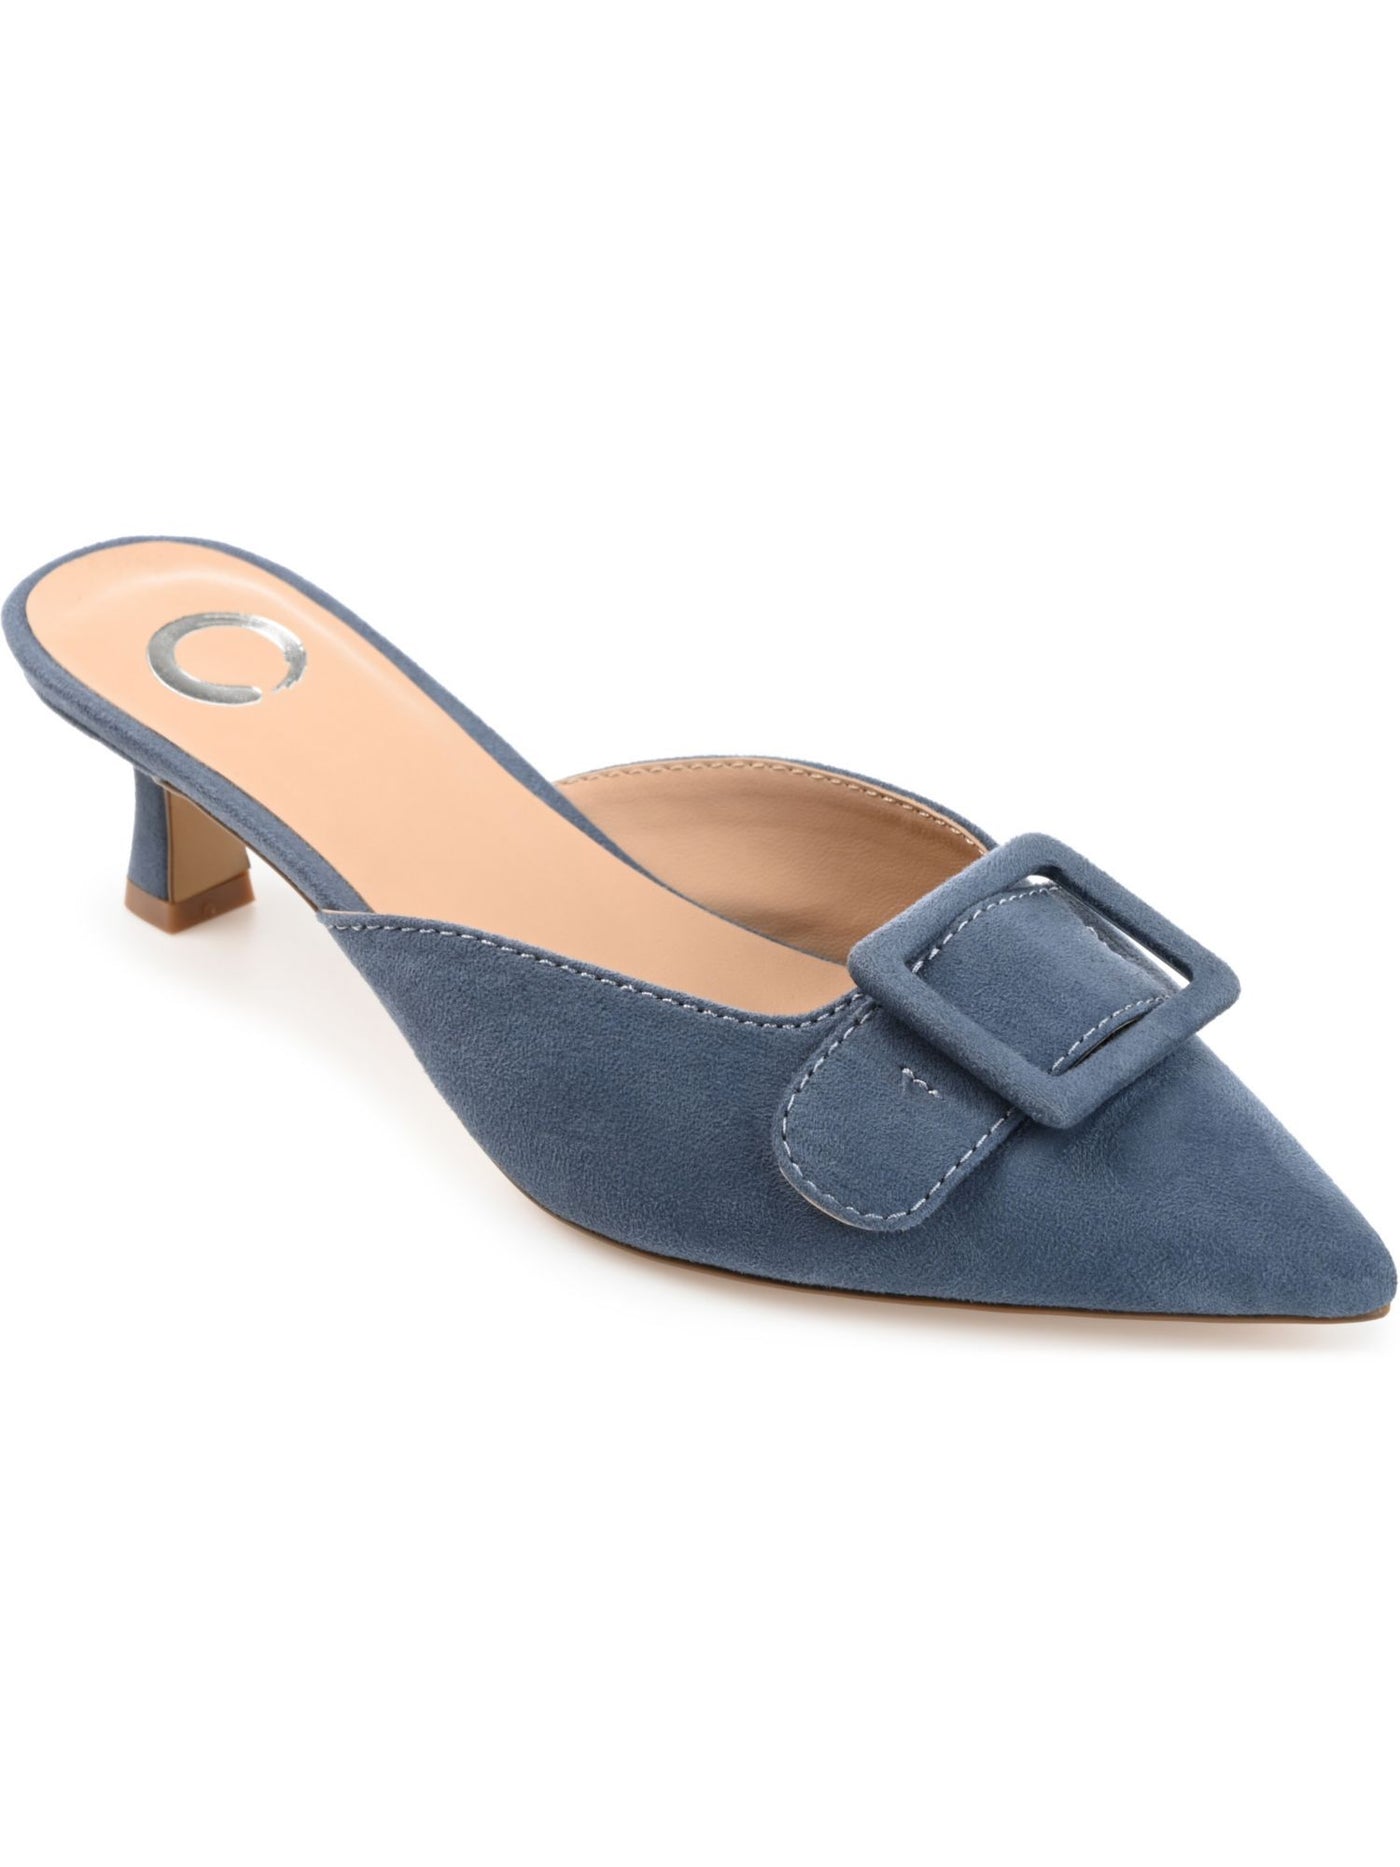 JOURNEE COLLECTION Womens Blue Buckle Accent Padded Vianna Pointed Toe Kitten Heel Slip On Heeled Mules Shoes 7.5